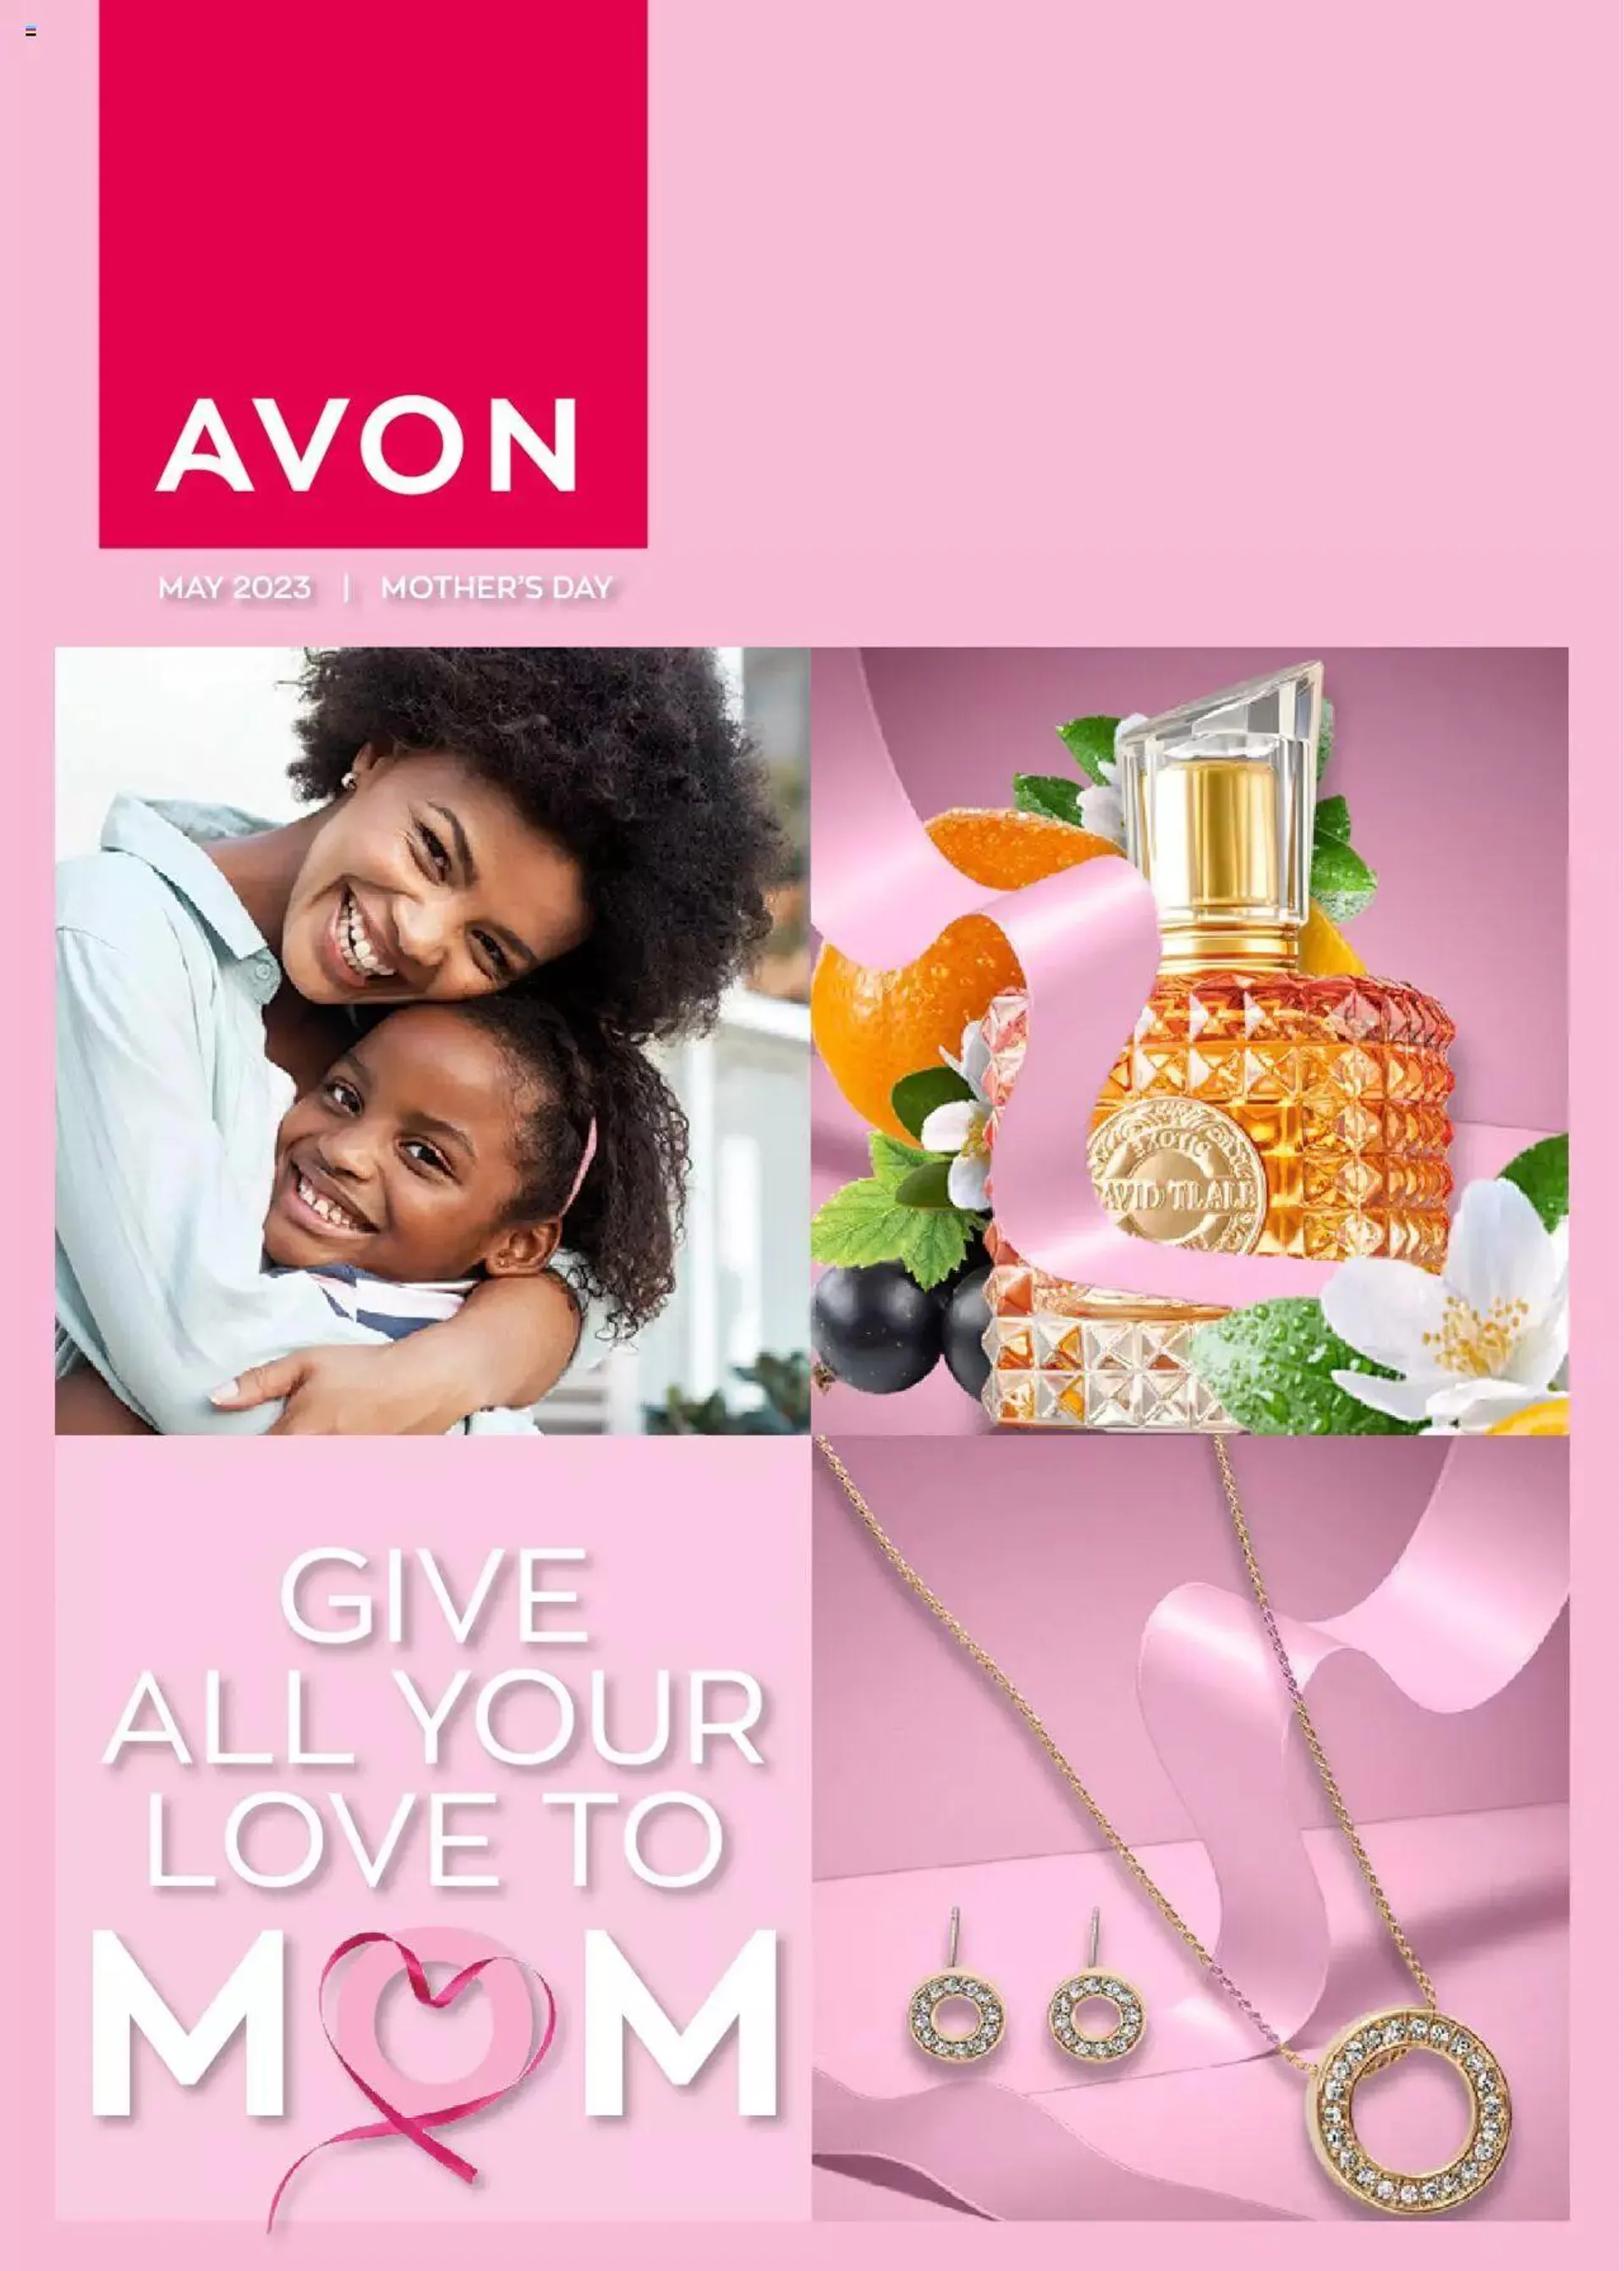 AVON Mothers Day - 0